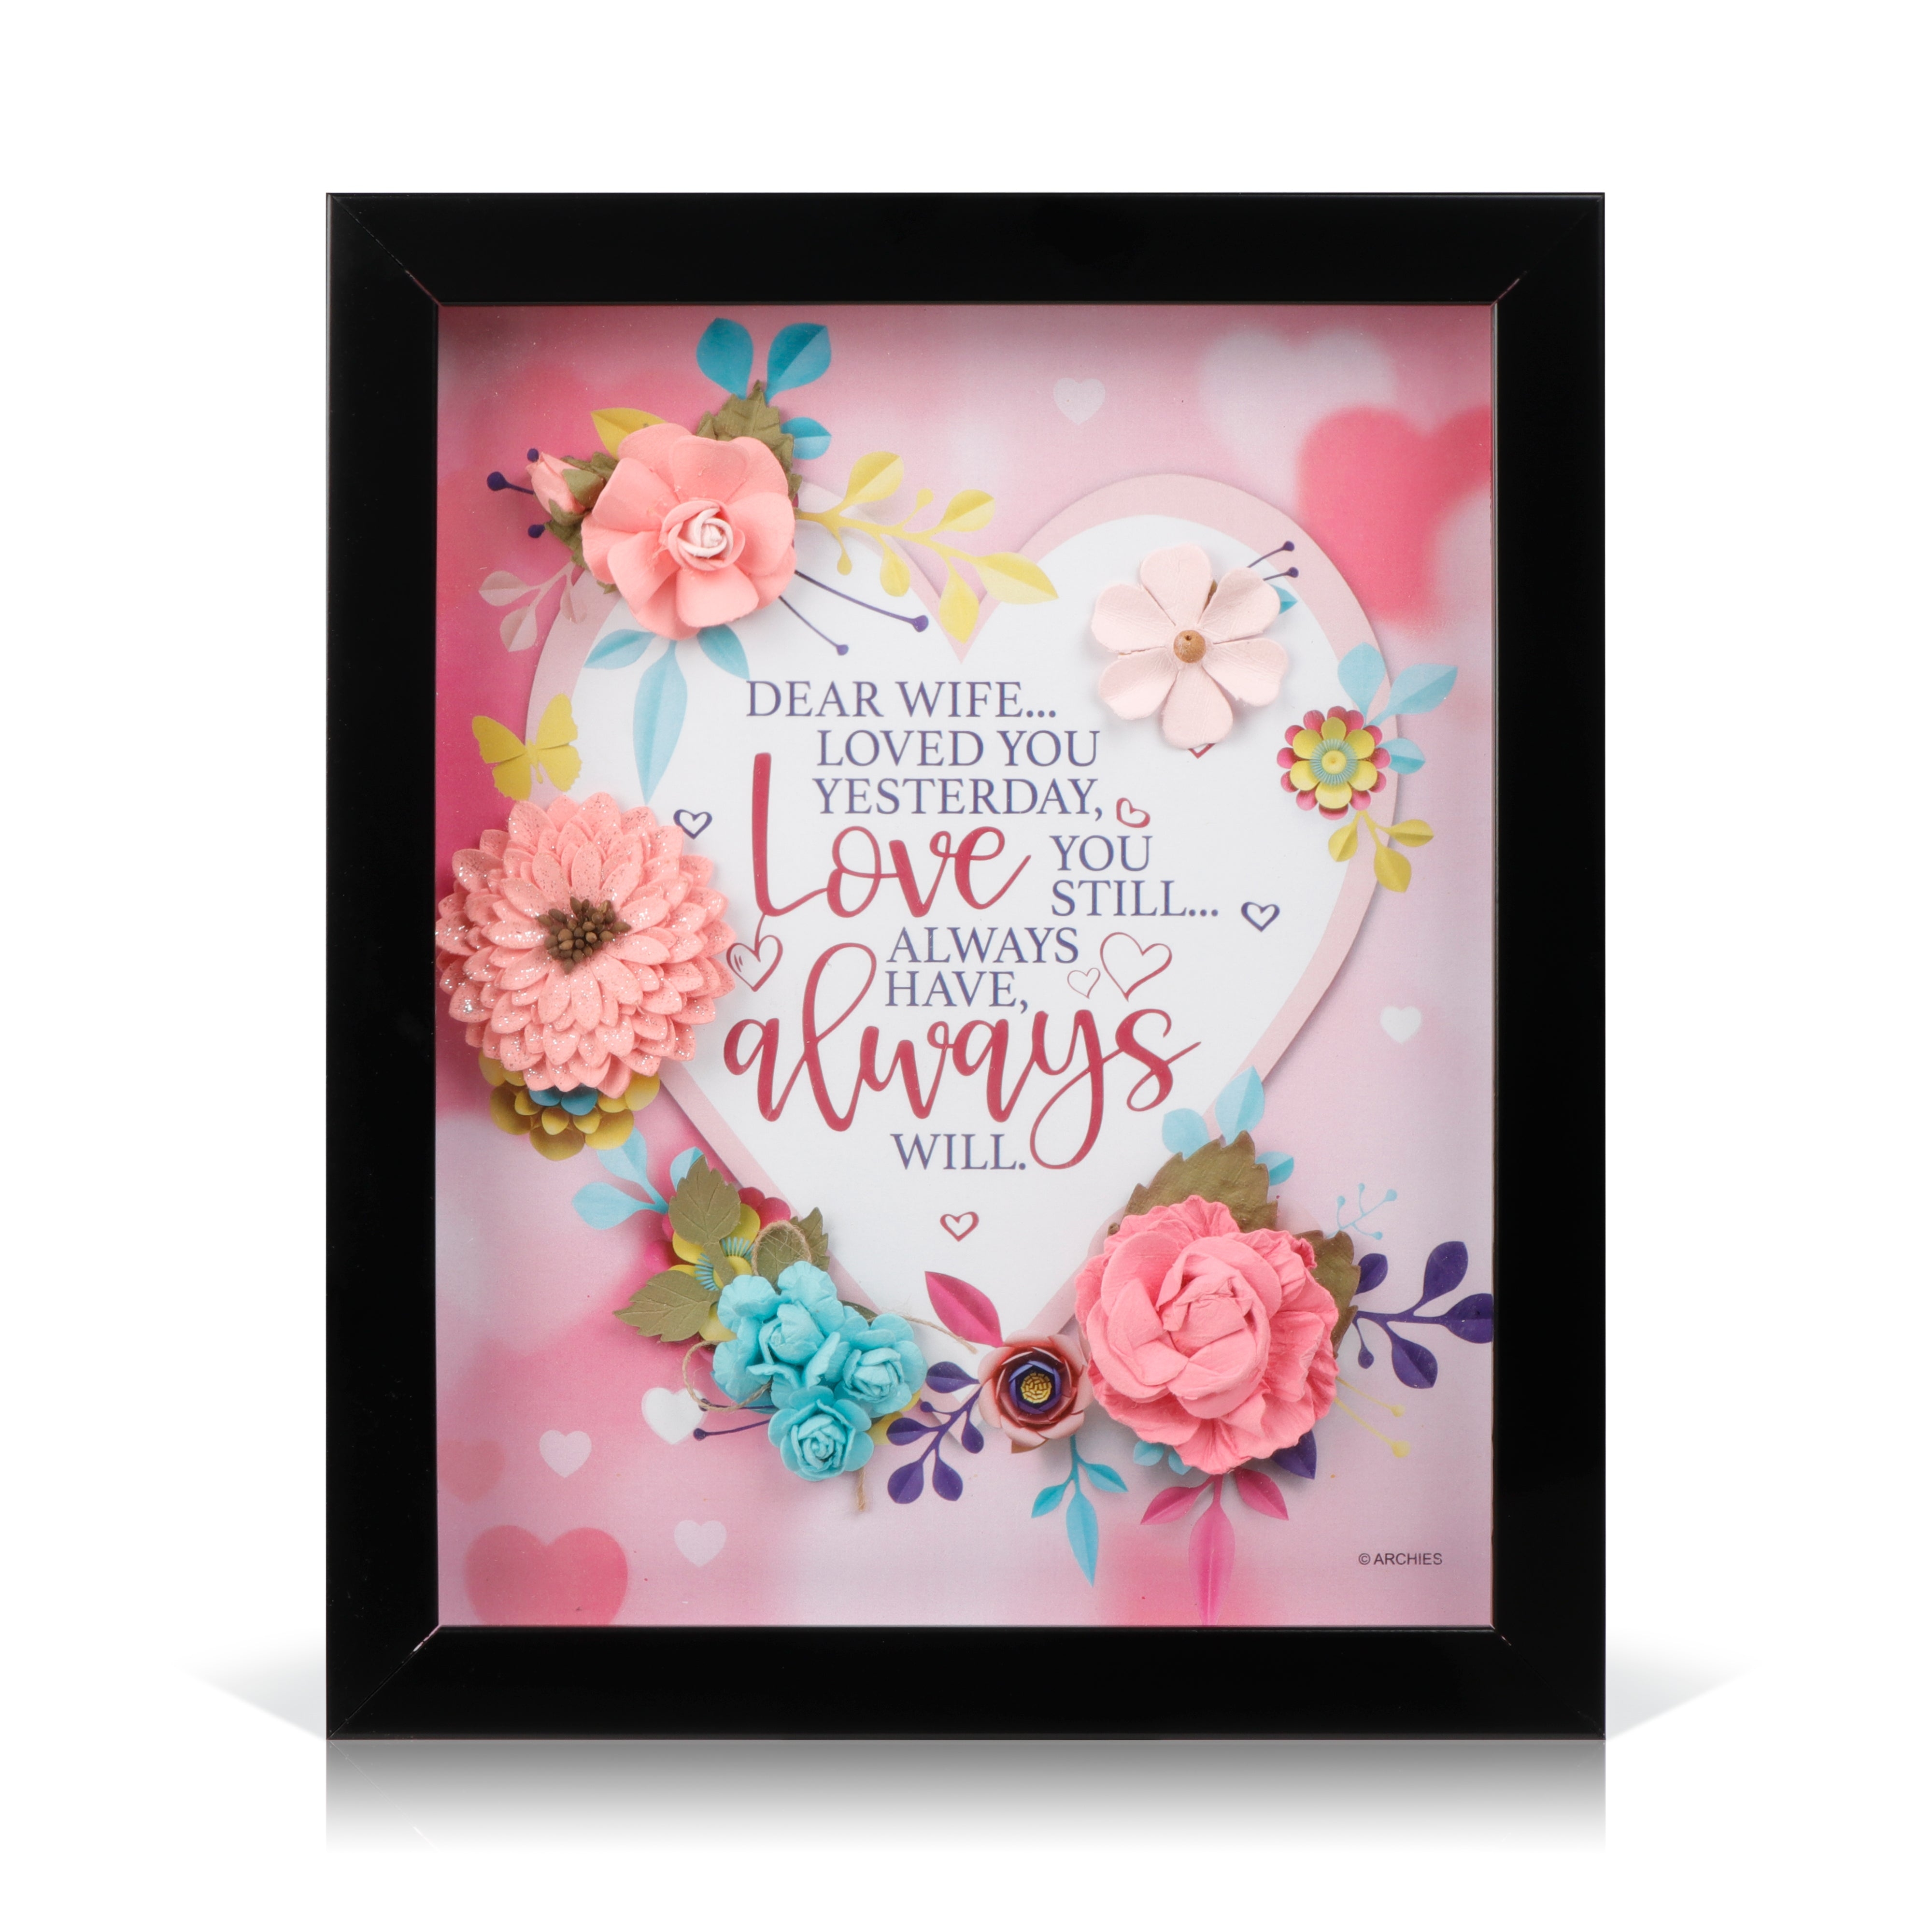 Archies | Archies KEEPSAKE QUOTATION - DEAR WIFE LOVED ..... For gifting and Home décor